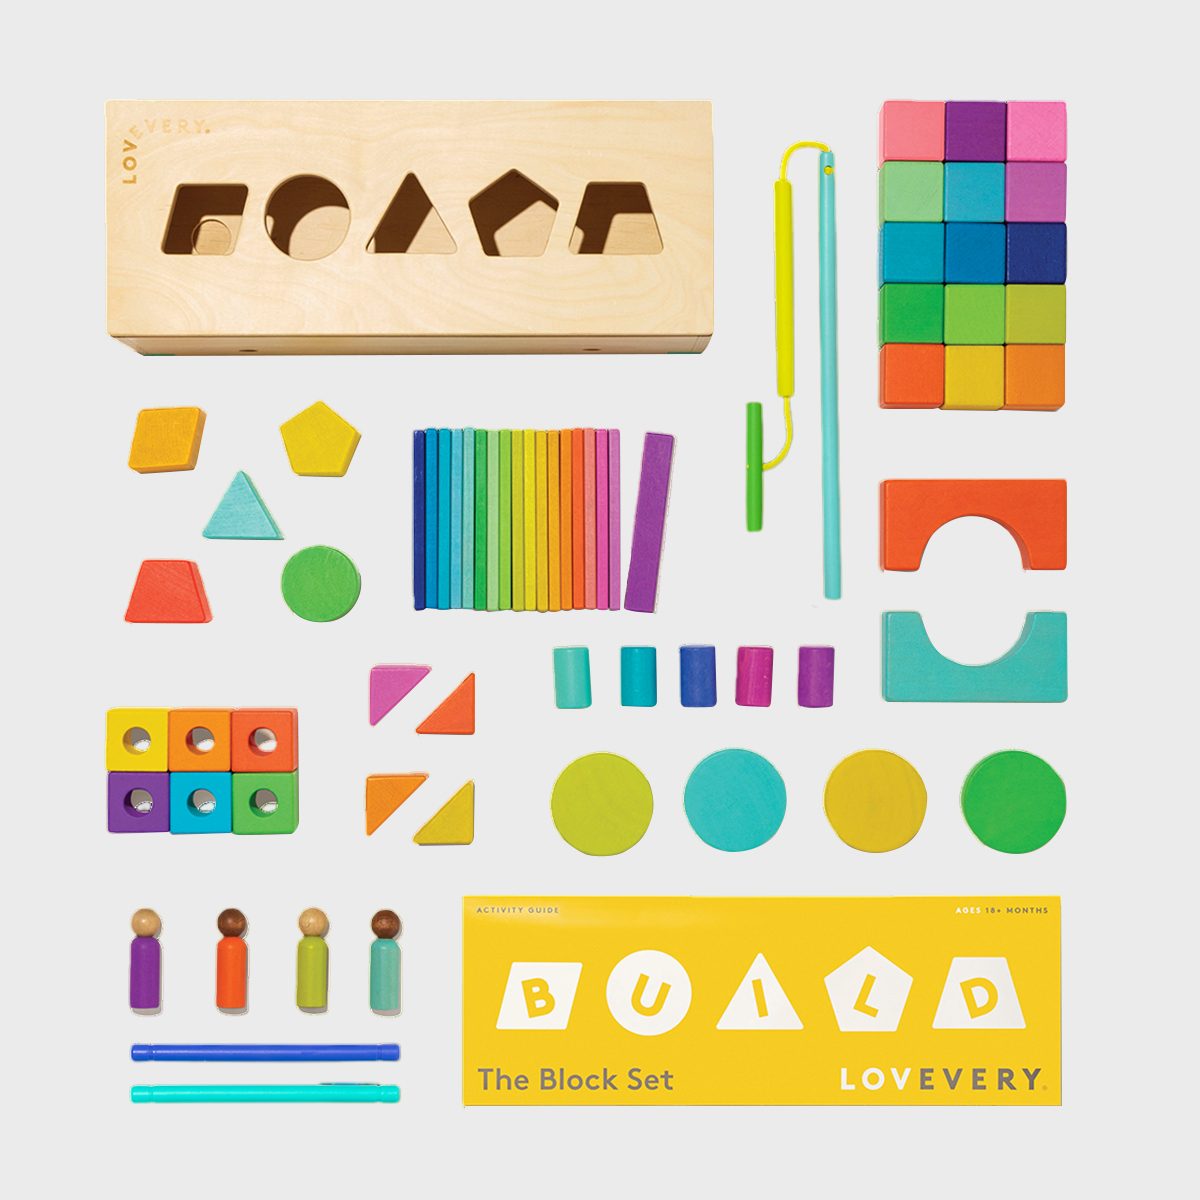 <p>Looking for gifts for girls that are both fun and educational? Lovevery has got you covered. The <a href="https://lovevery.com/products/the-block-set" rel="noopener">Block Set</a> comes with 70 solid wood pieces in 18 different colorways, shapes and tools.</p> <p>It also includes a wooden storage box that converts into a pull car and a drawstring bag for easy storage. It's perfect for ages 18 months to age 4. Kids can stack, roll, count, sort, categorize and connect the wooden blocks as they learn and grow.</p> <p class="listicle-page__cta-button-shop"><a class="shop-btn" href="https://lovevery.com/products/the-block-set">Shop Now</a></p>